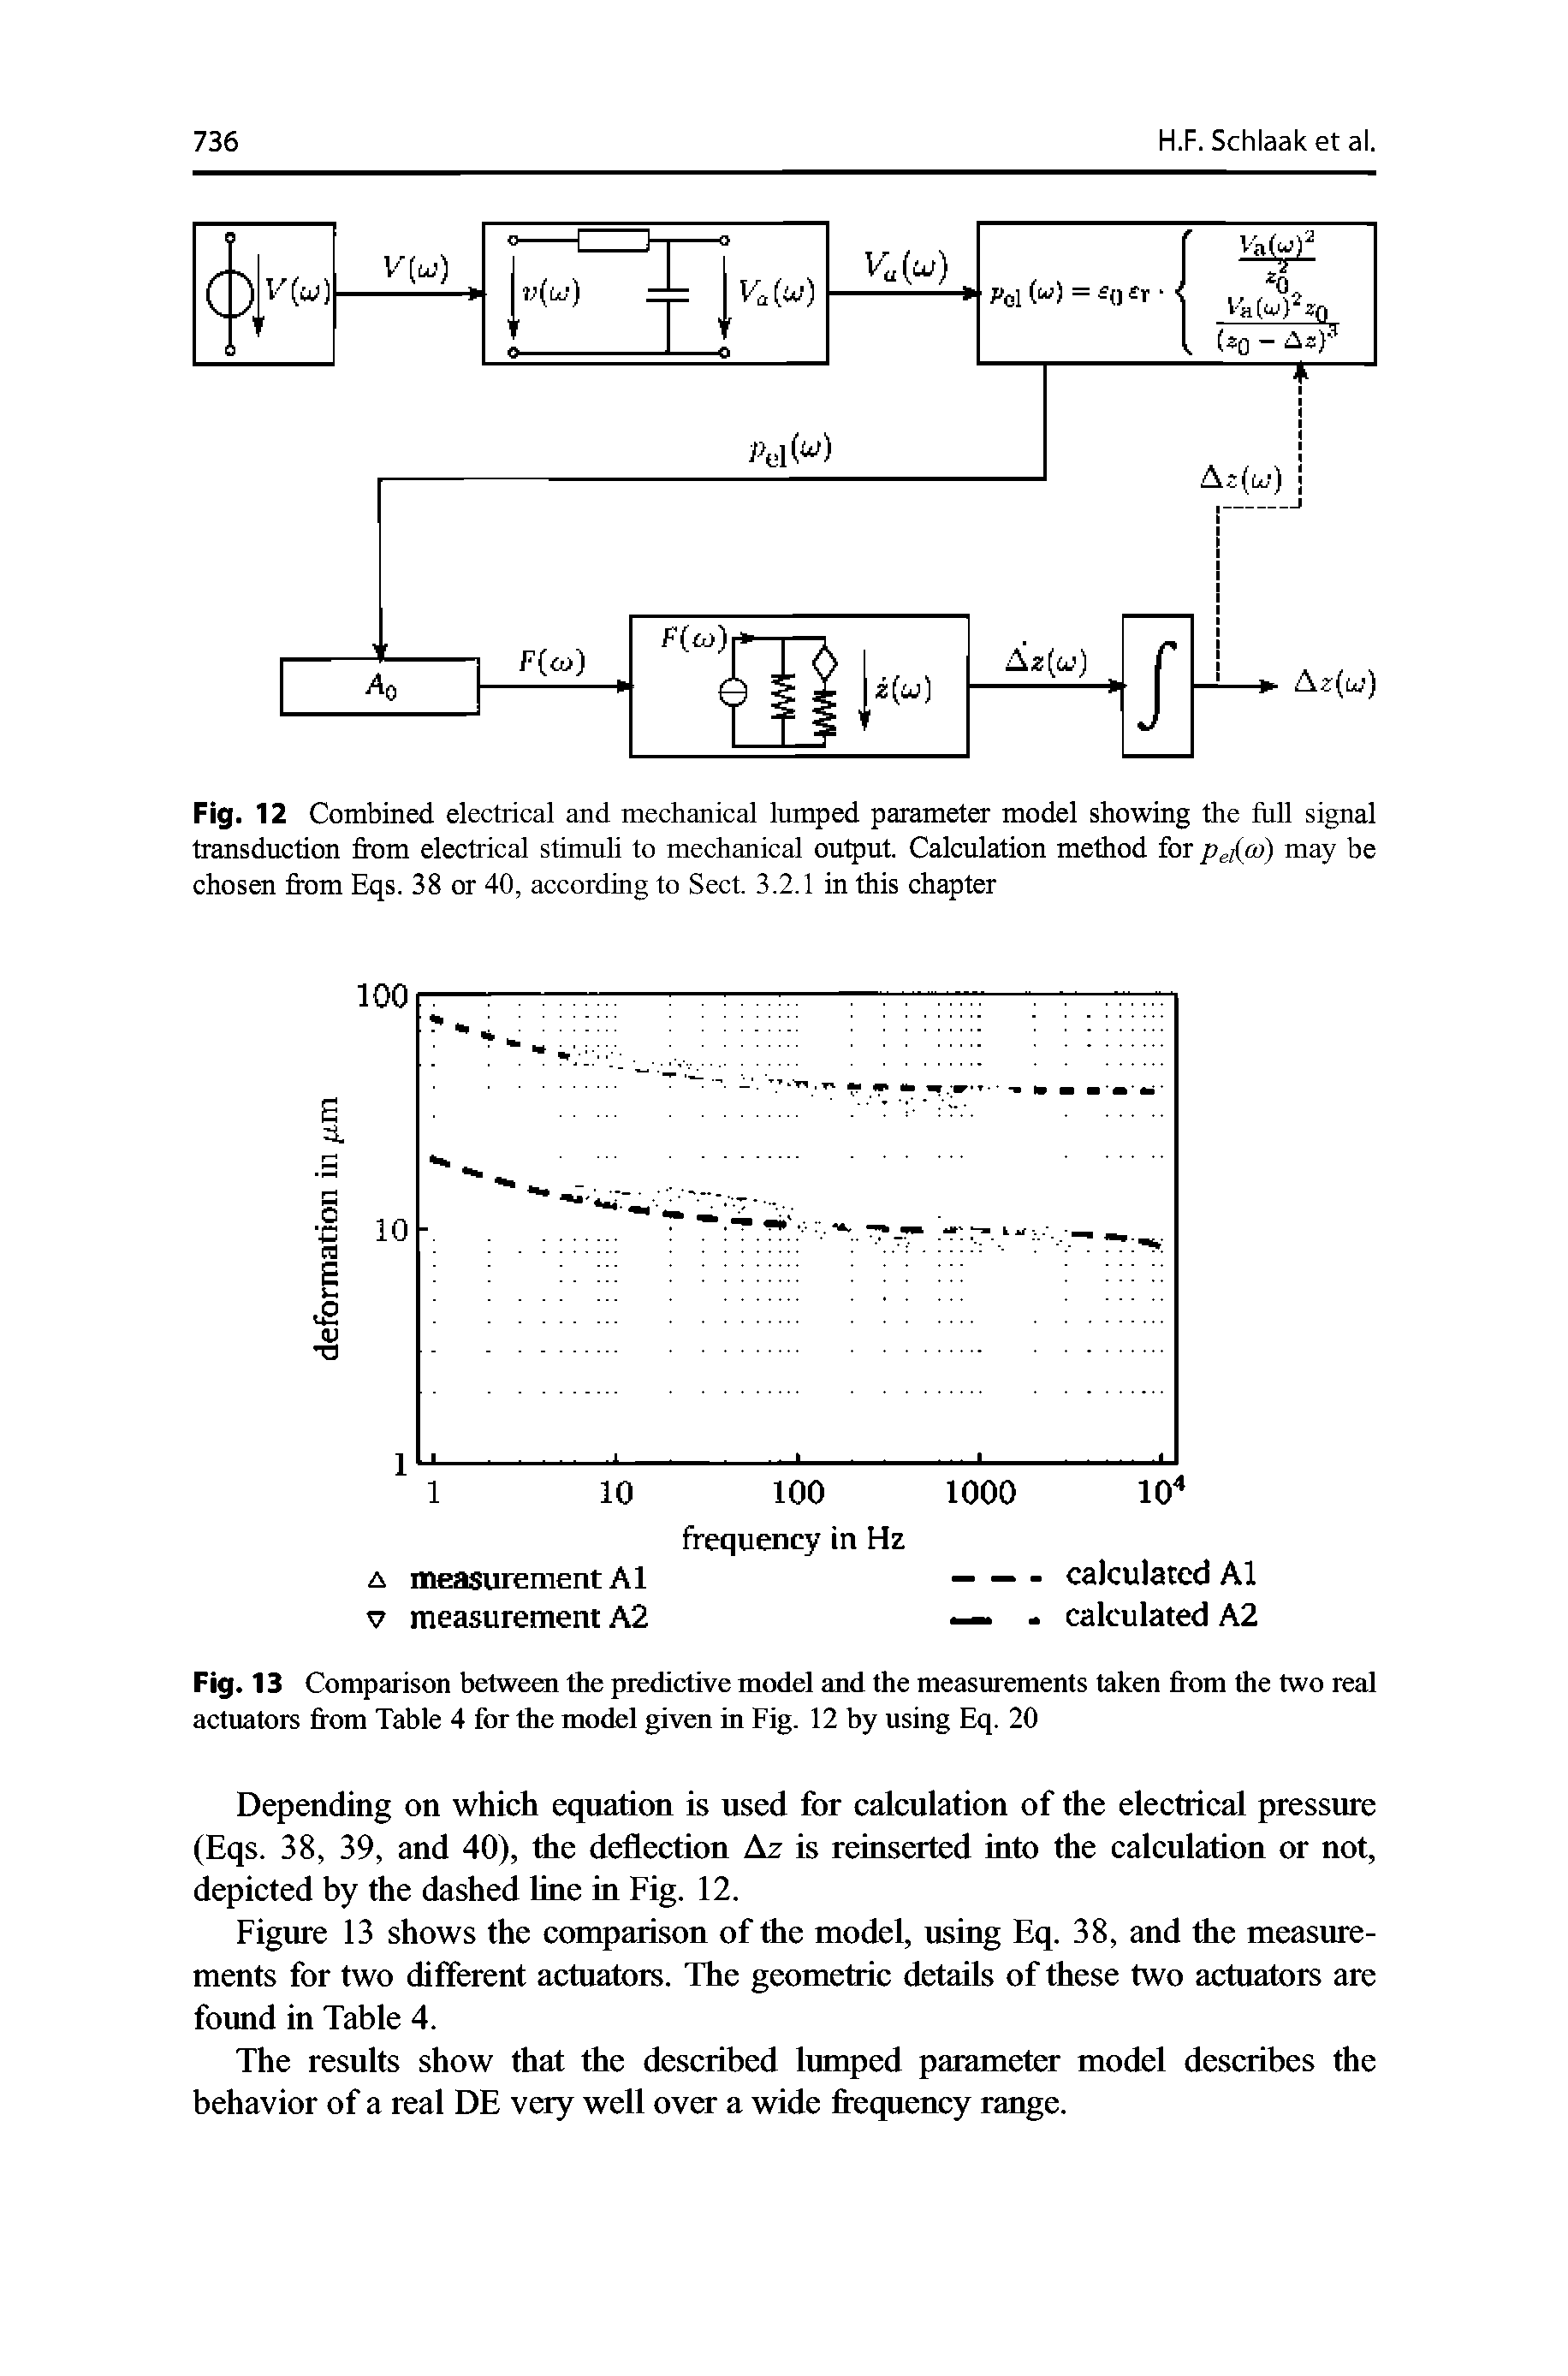 Fig. 12 Combined electrical and mechanical lumped parameter model showing the full signal transduction from electrical stimuli to mechanical output. Calculation method for Pe w) may be chosen from Eqs. 38 or 40, according to Sect. 3.2.1 in this chapter...